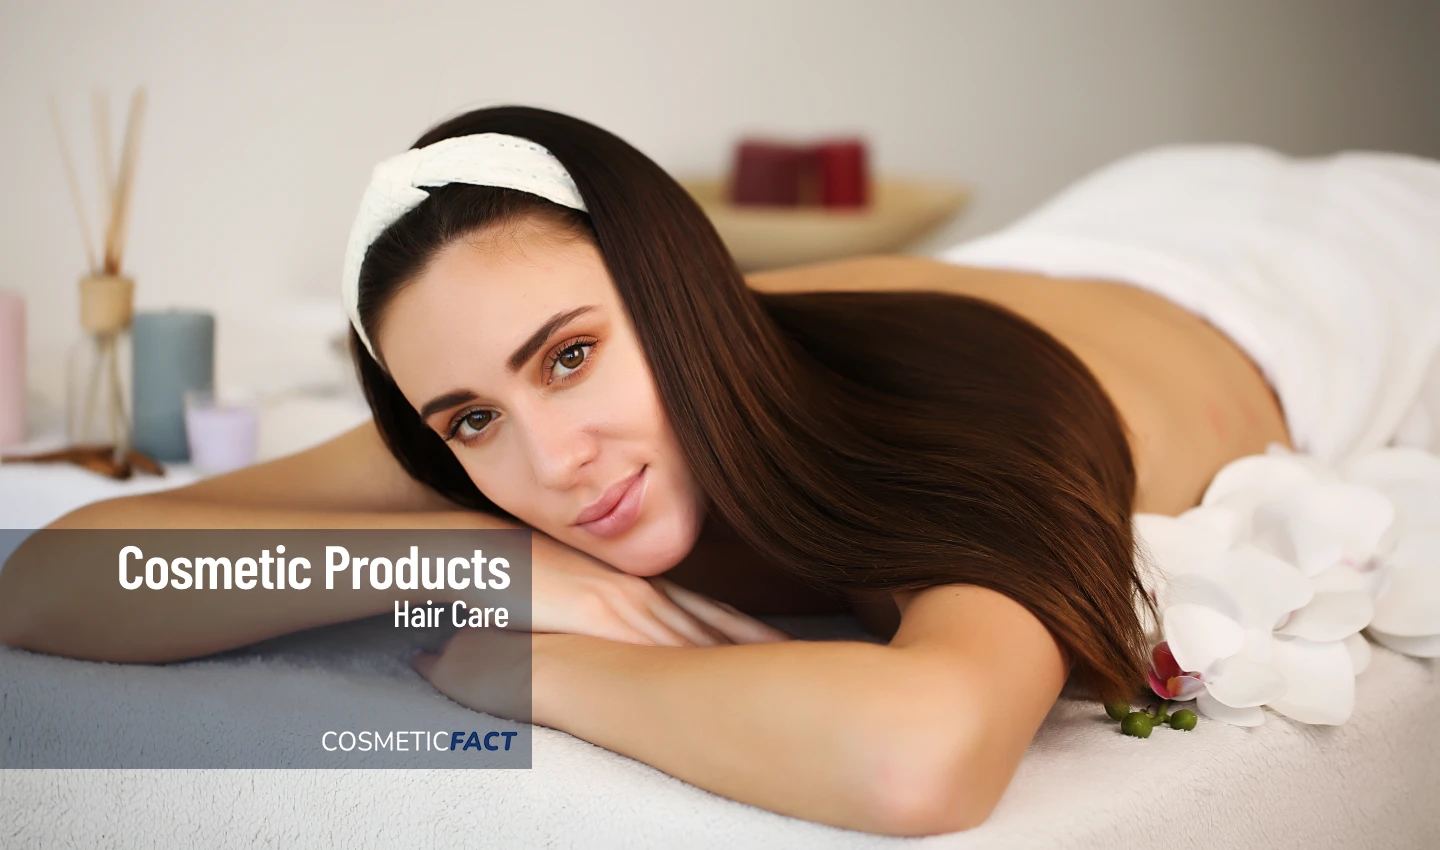 Woman with long, silky hair and a cream headband smiling at the camera, enjoying the benefits of indulgent hair treatments for healthy, happy hair.